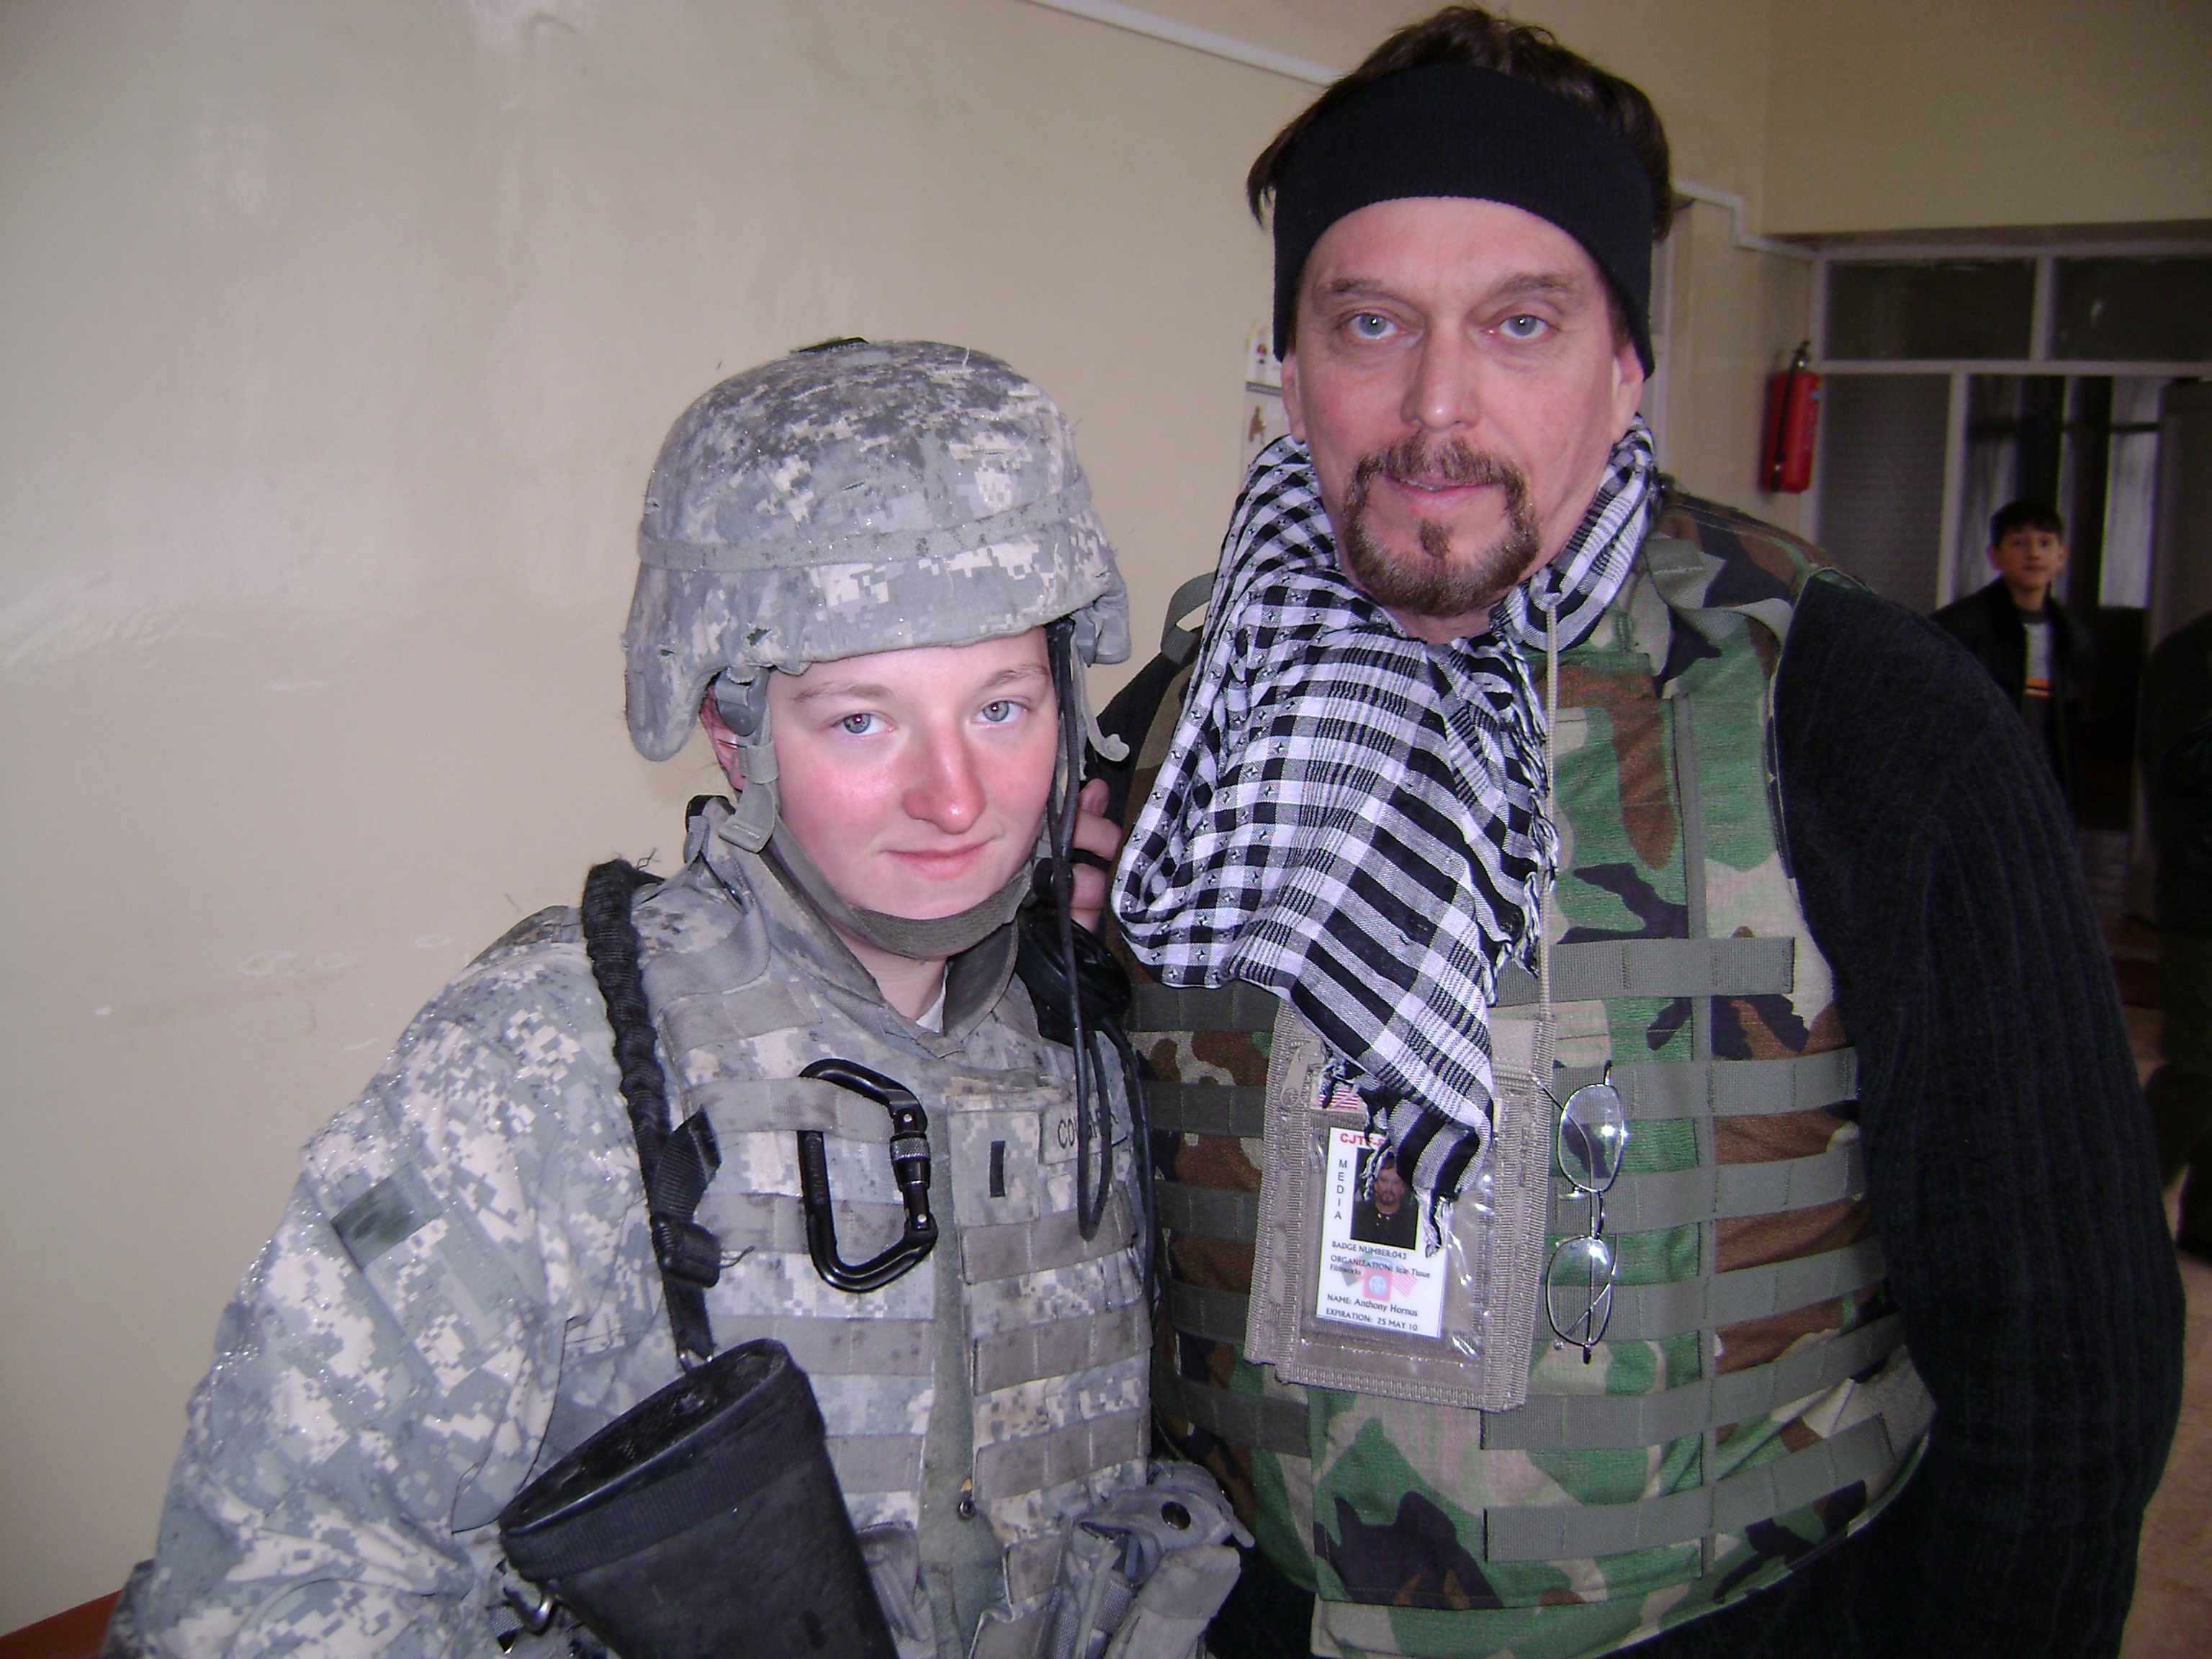 Actor-Filmmaker Anthony Hornus in Afghanistan with 1st Lieutenant Kelly Coughenour of Akron, Ohio, a member of the 838th Military Police based in Youngstown, Ohio, during the filming of Outside the Wire: The Forgotten Children of Afghanistan.